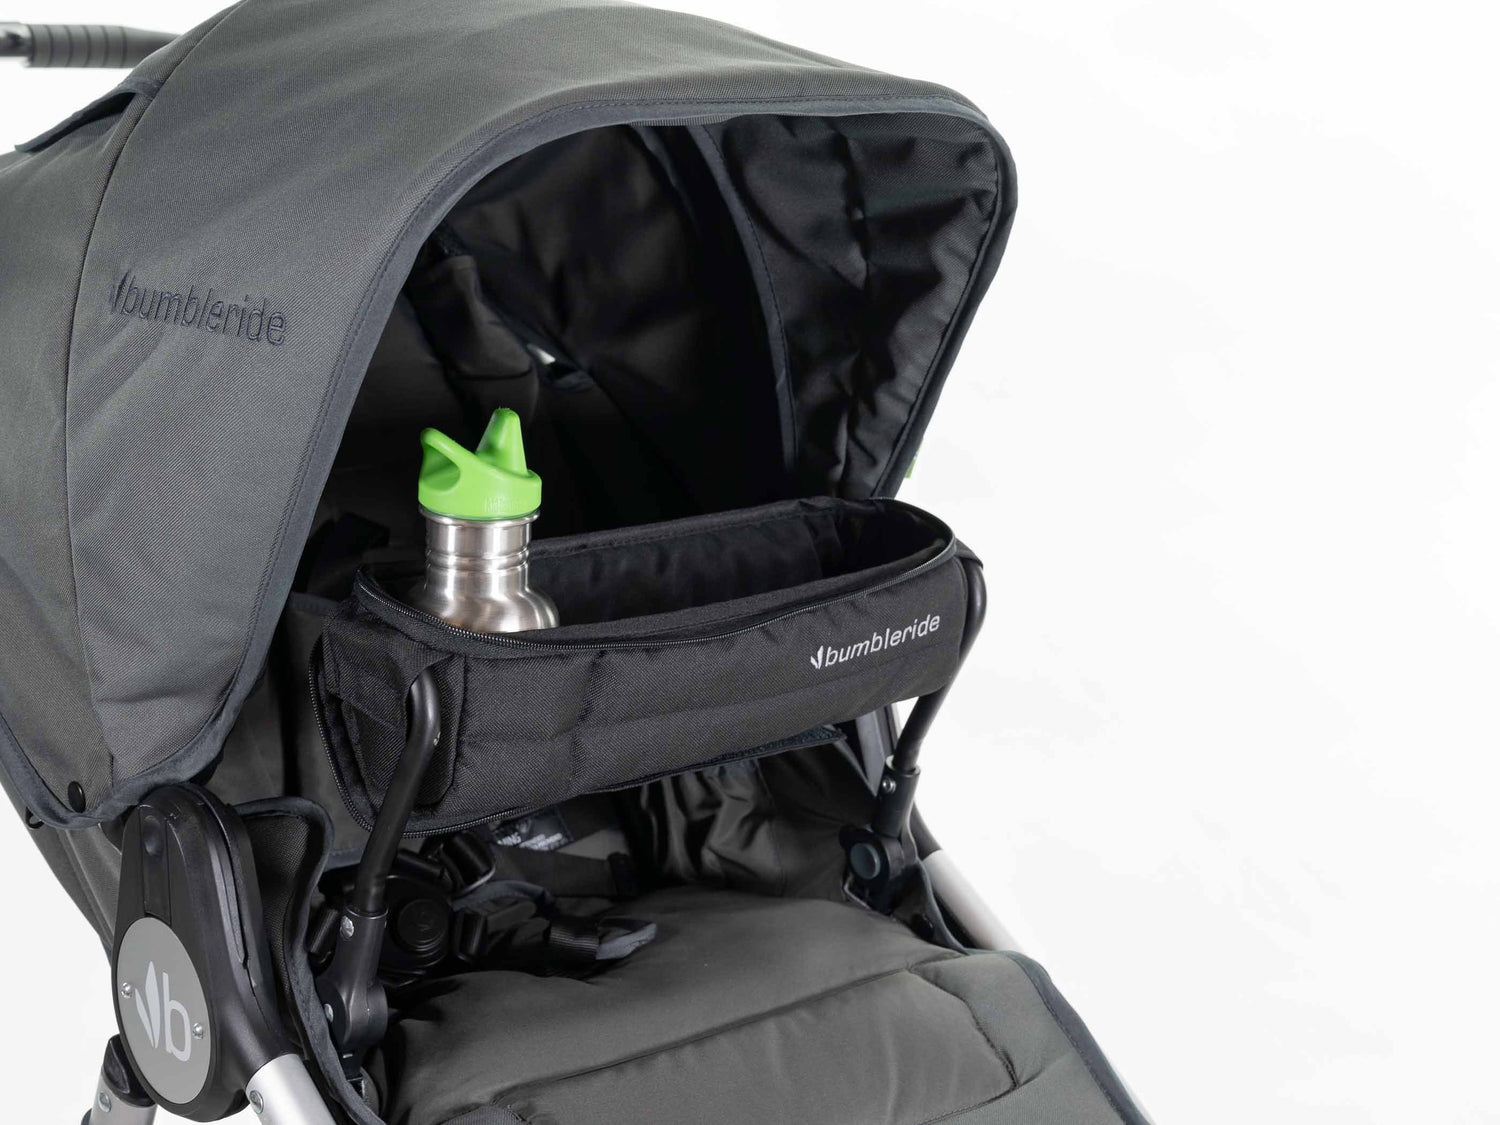 baby stroller luggage